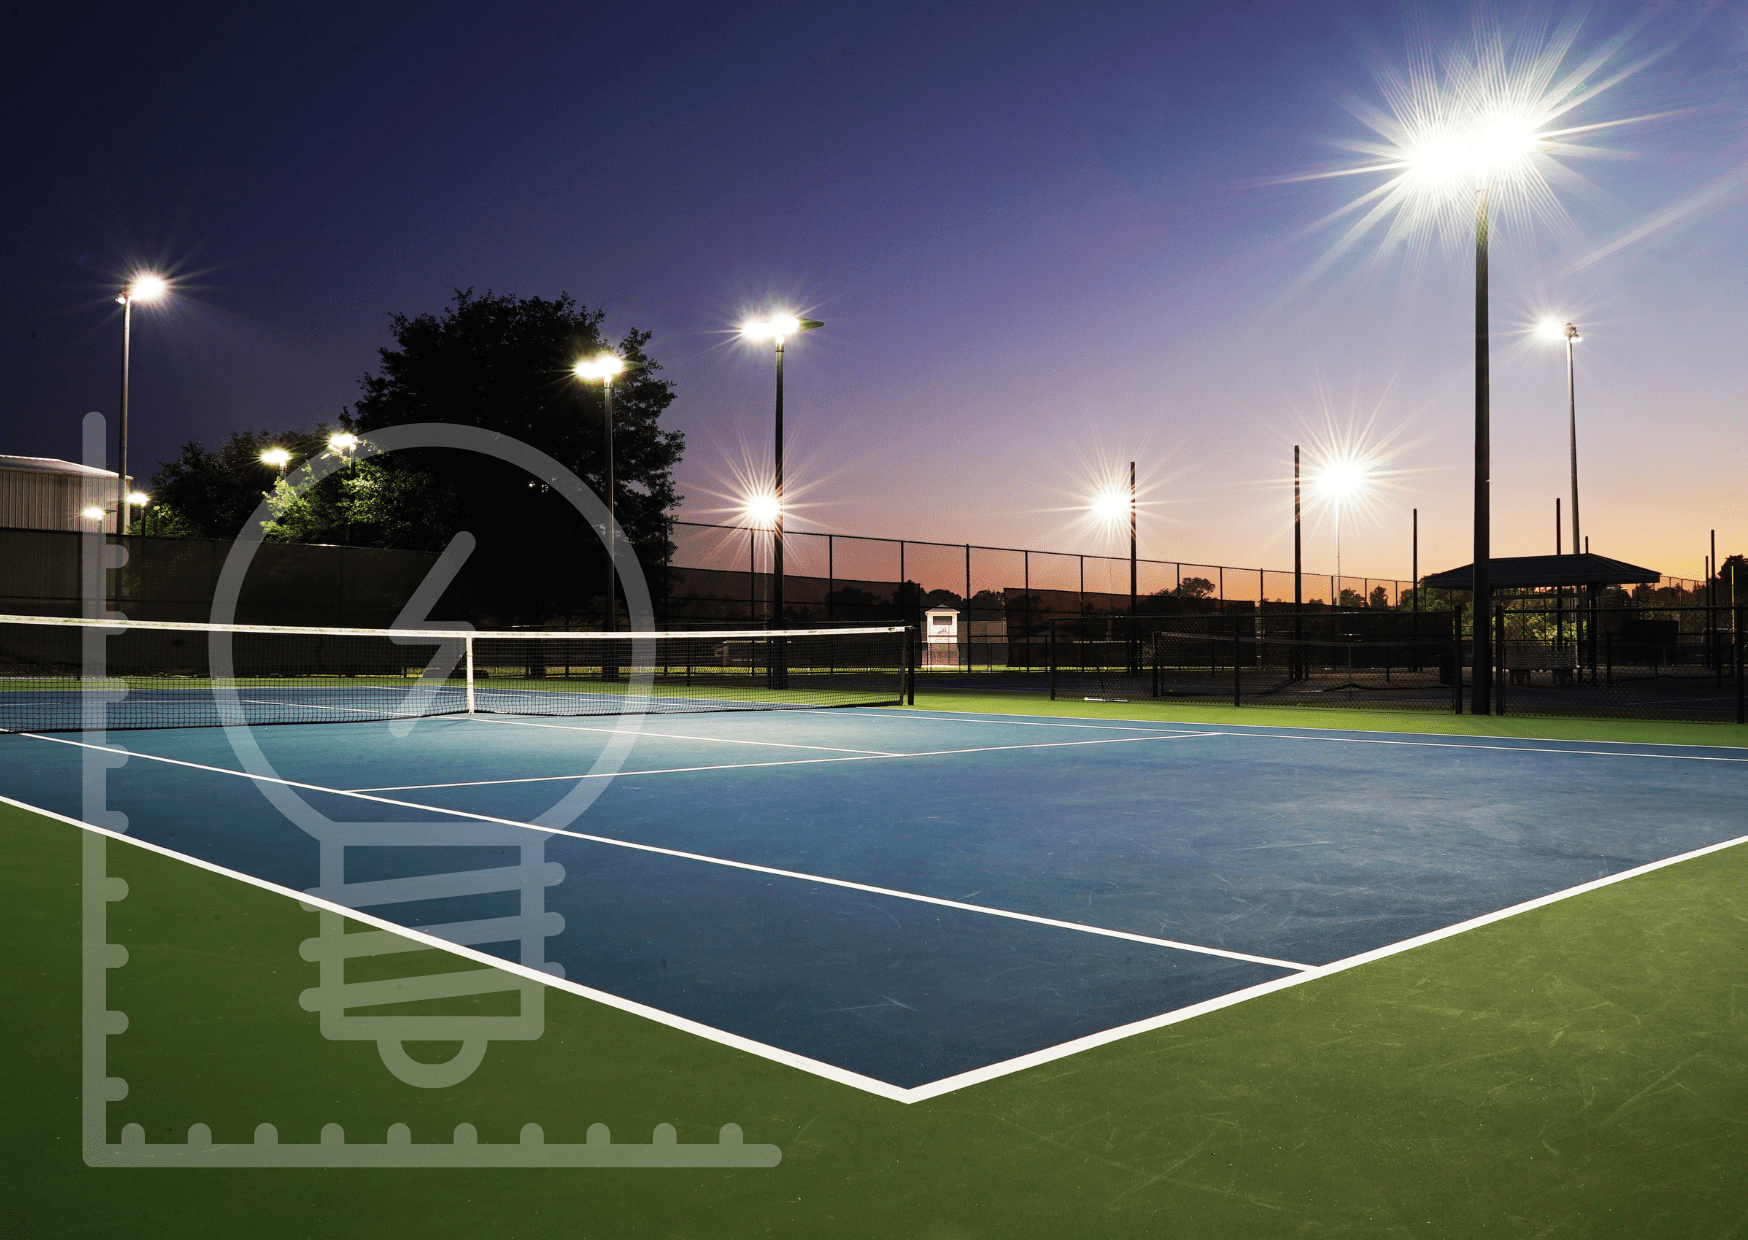 photograph of tennis court at dusk with illumated solar light and overlay with light bulb and graph in bottom left corner